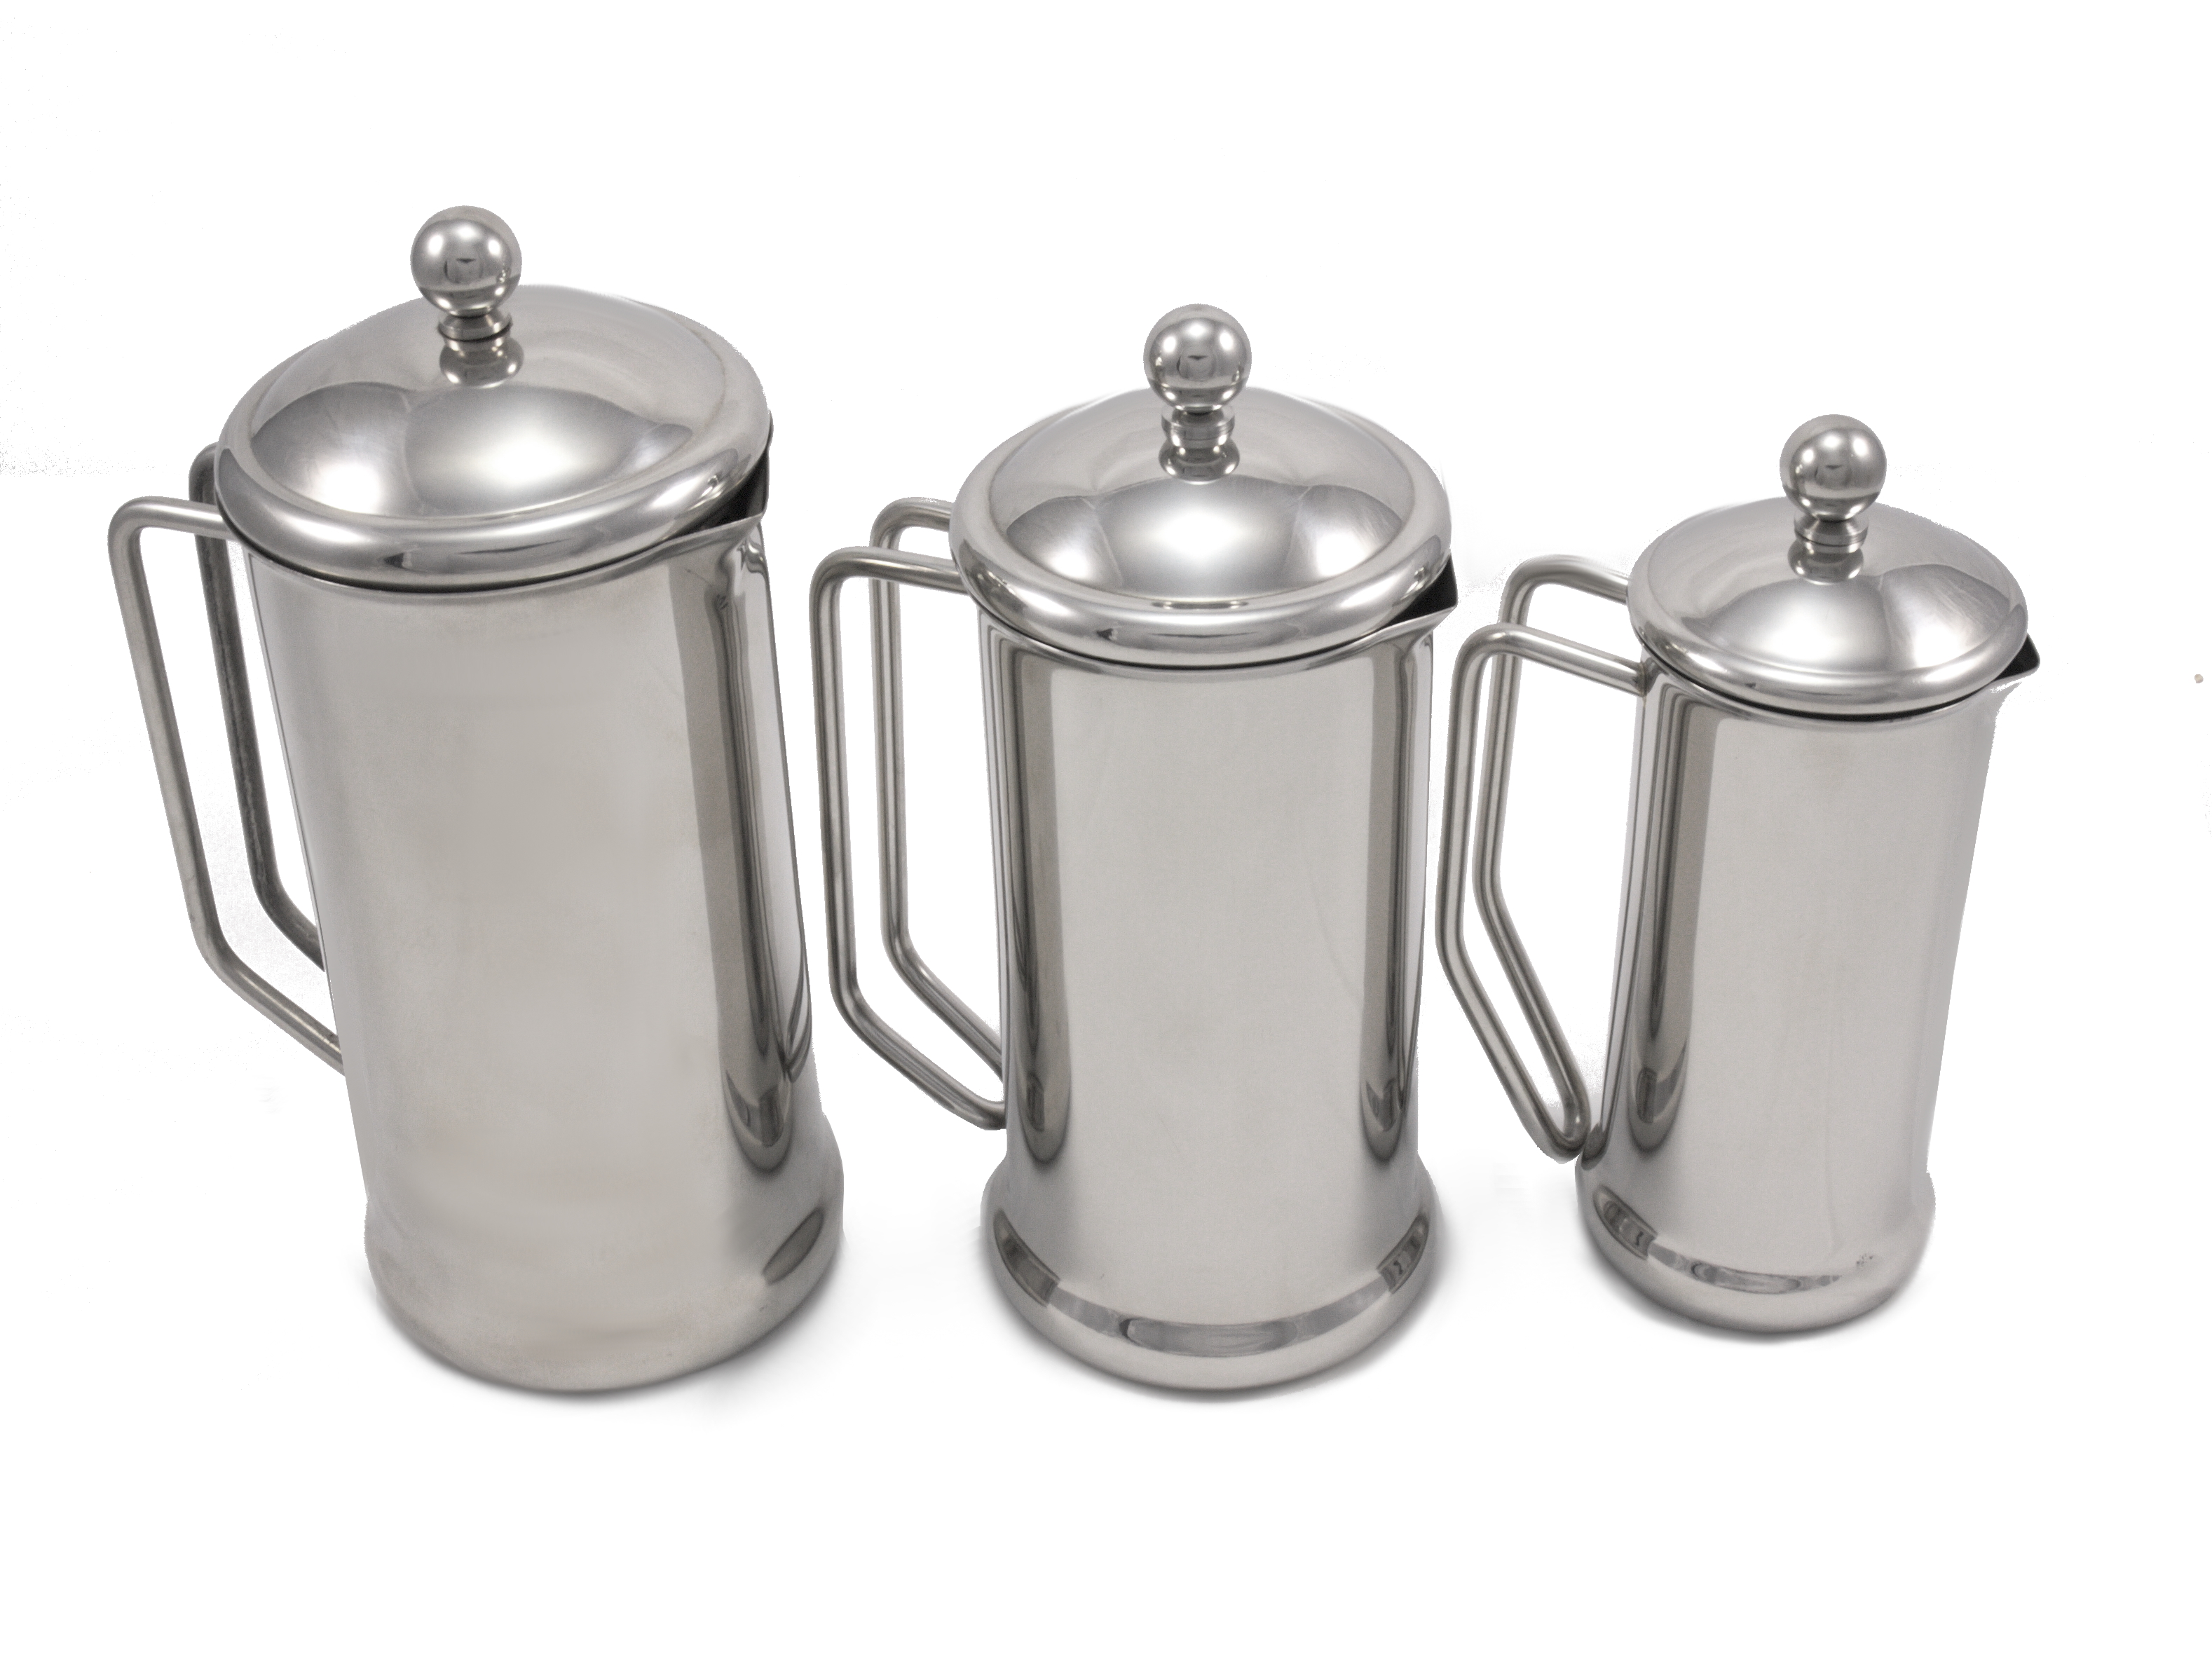 Stainless steel cafetieres POLISHED finish (various sizes available)